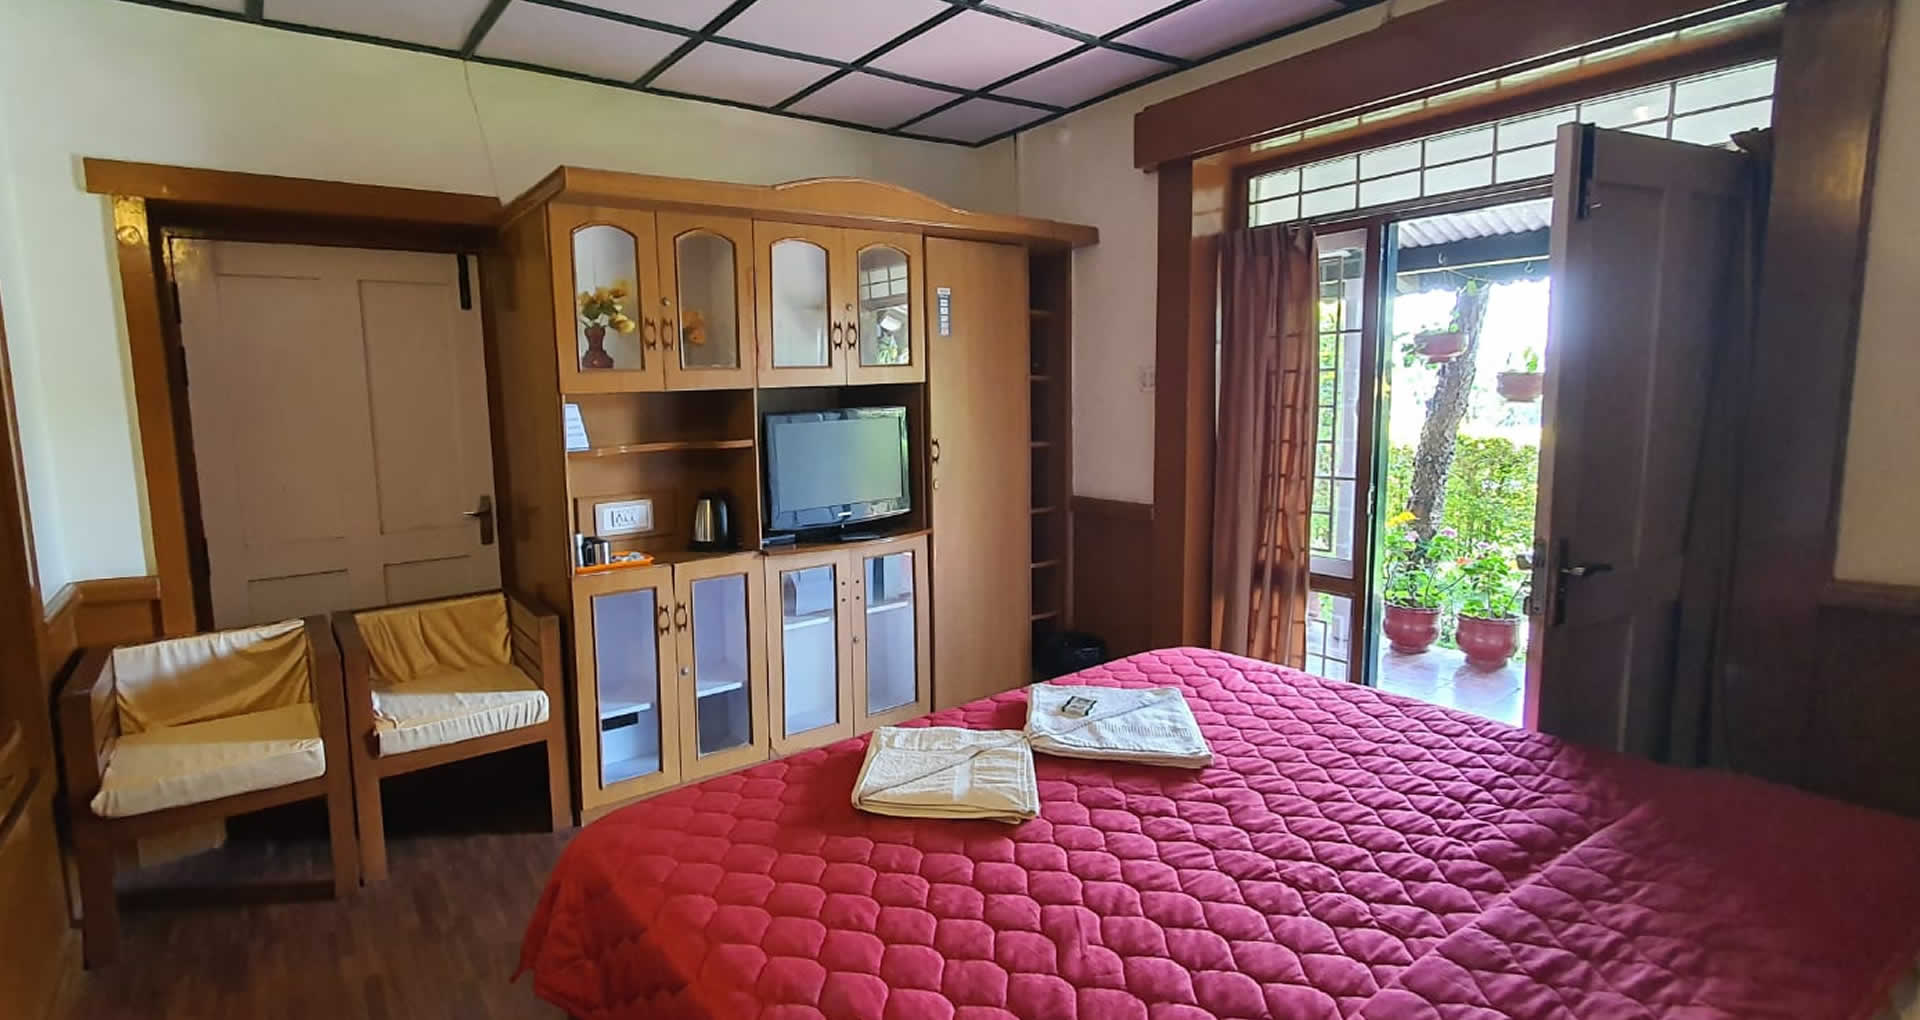 Hotels, Cottages, Rooms, Suites in Kodaikanal